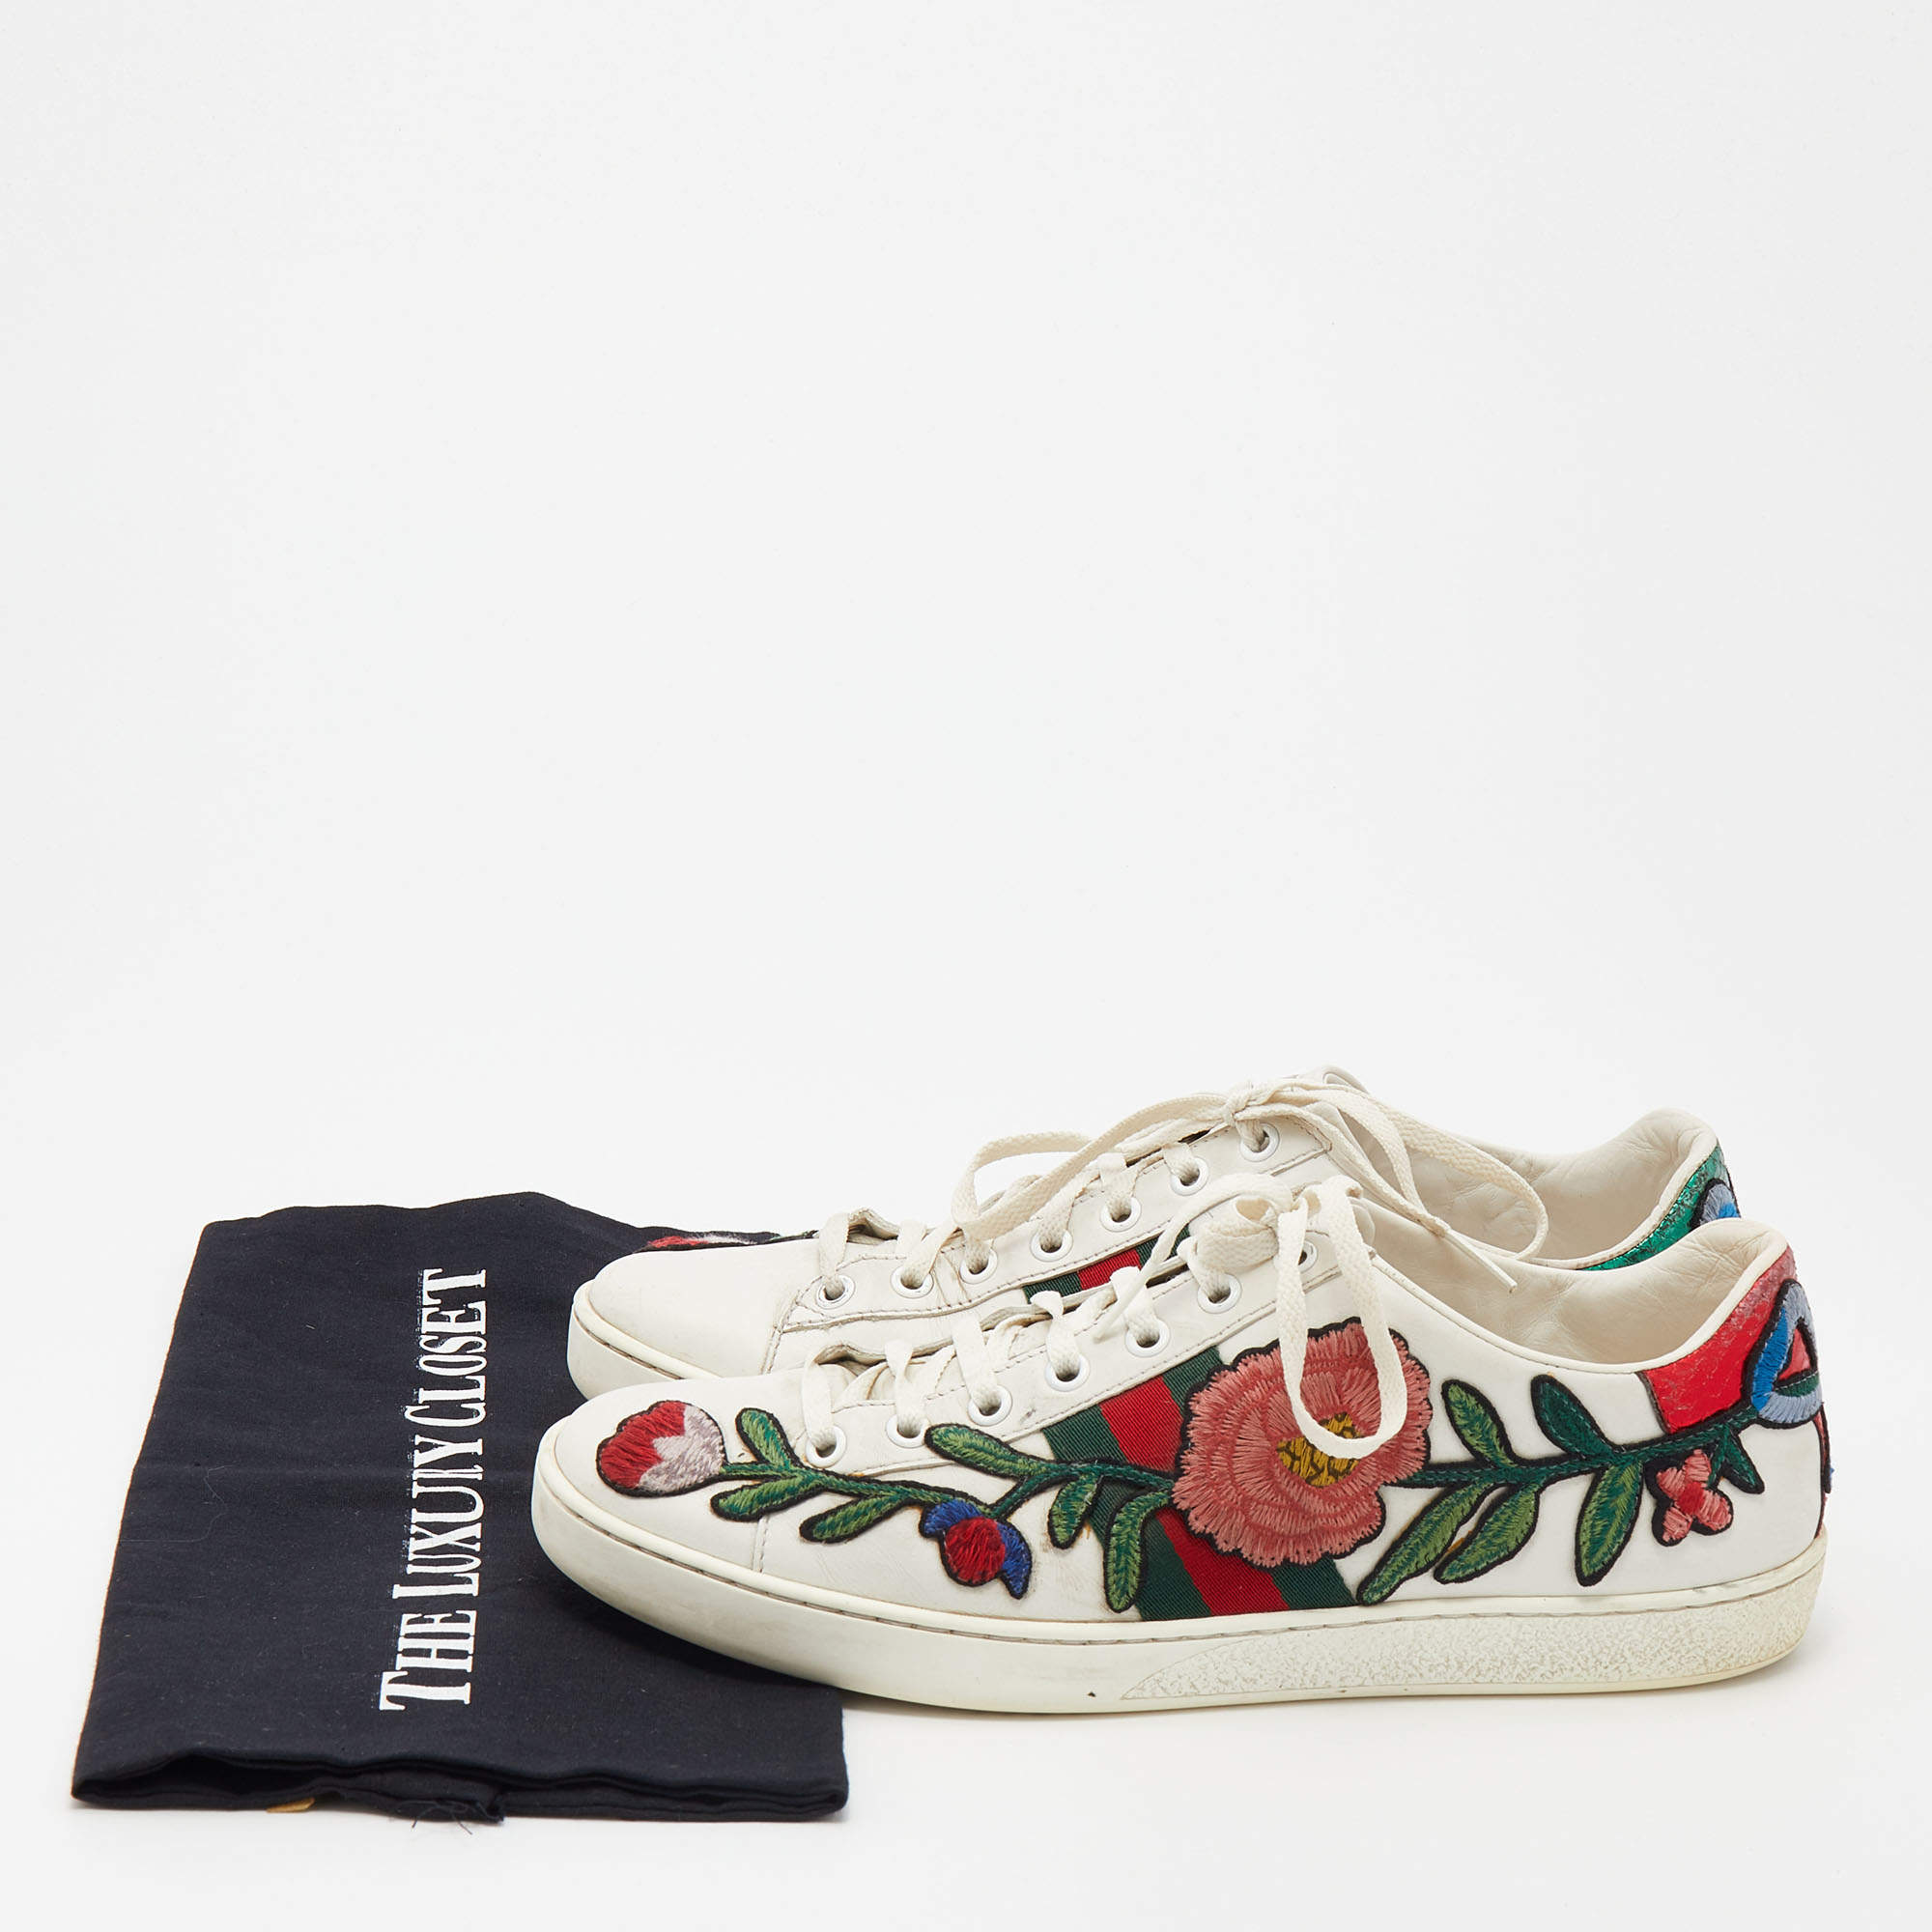 Gucci Canvas Floral Ace Sneakers - Size 8.5 / 38.5 (SHF-20918